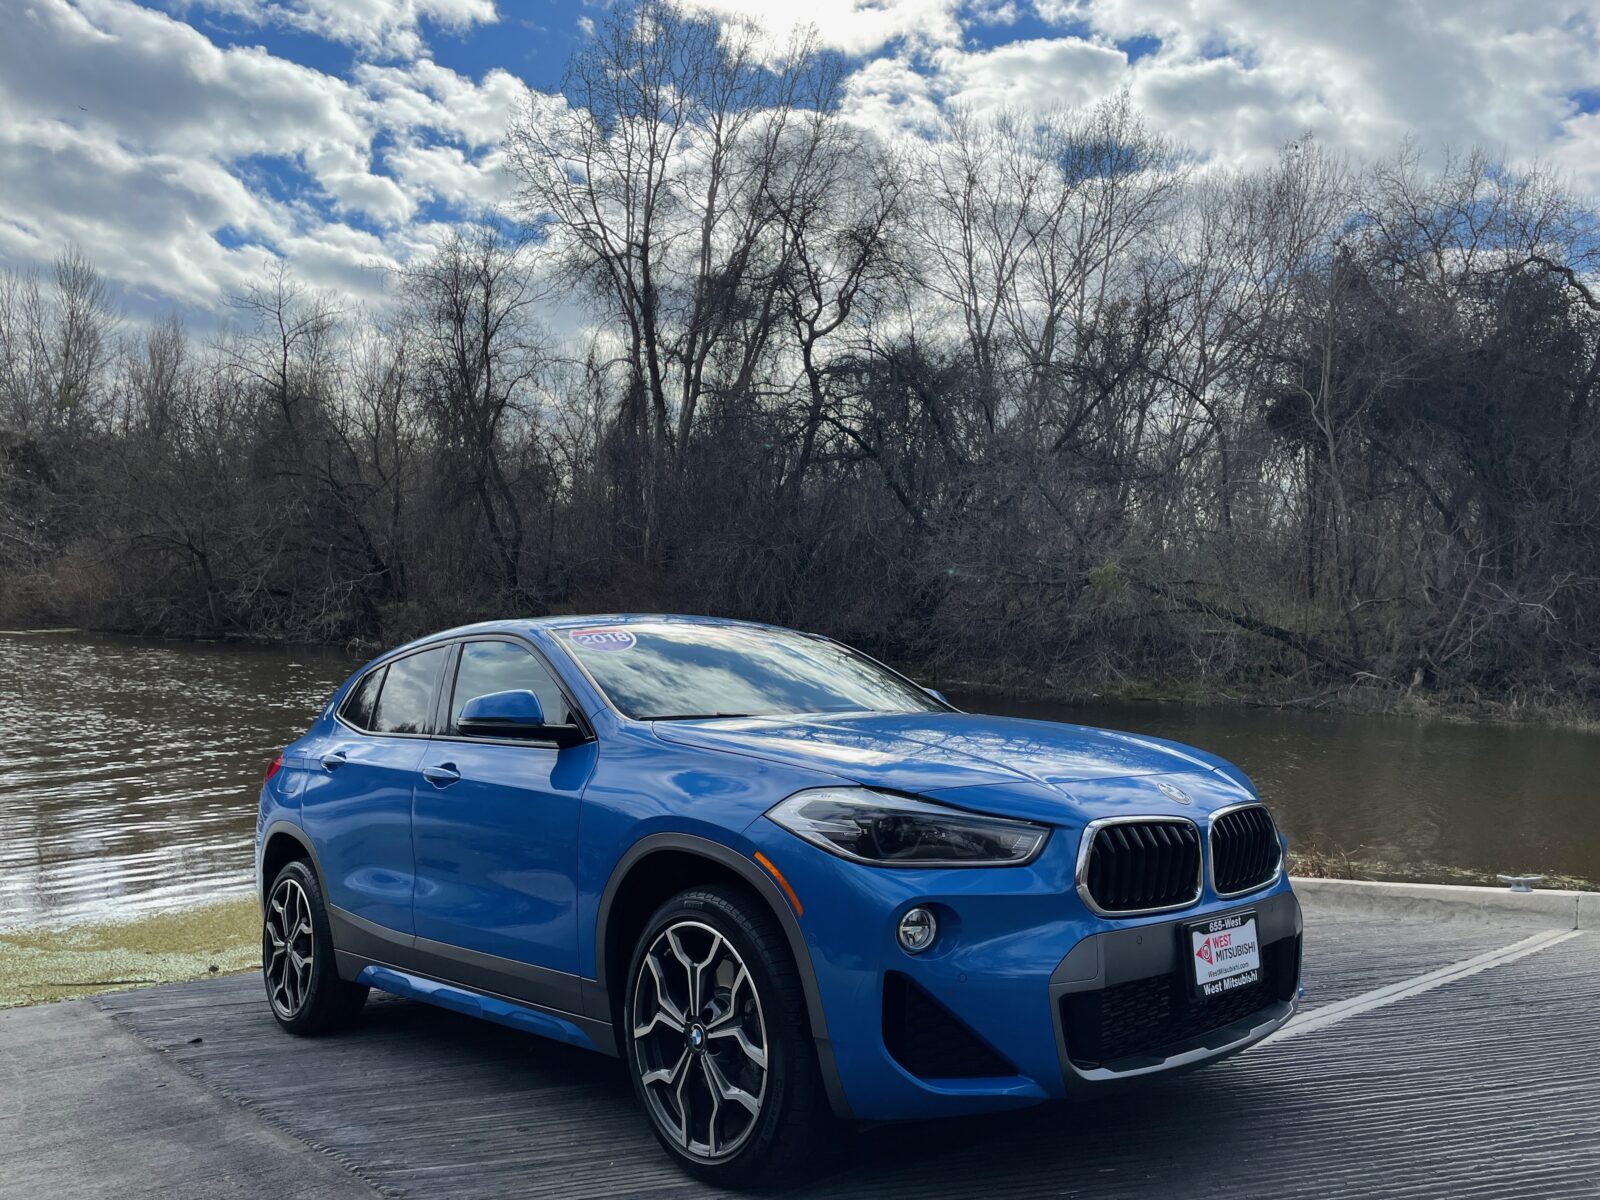 This Gorgeous 2018 BMW X2 xDrive28i is for Sale in Chico and Redding from WestMitsubishi.com